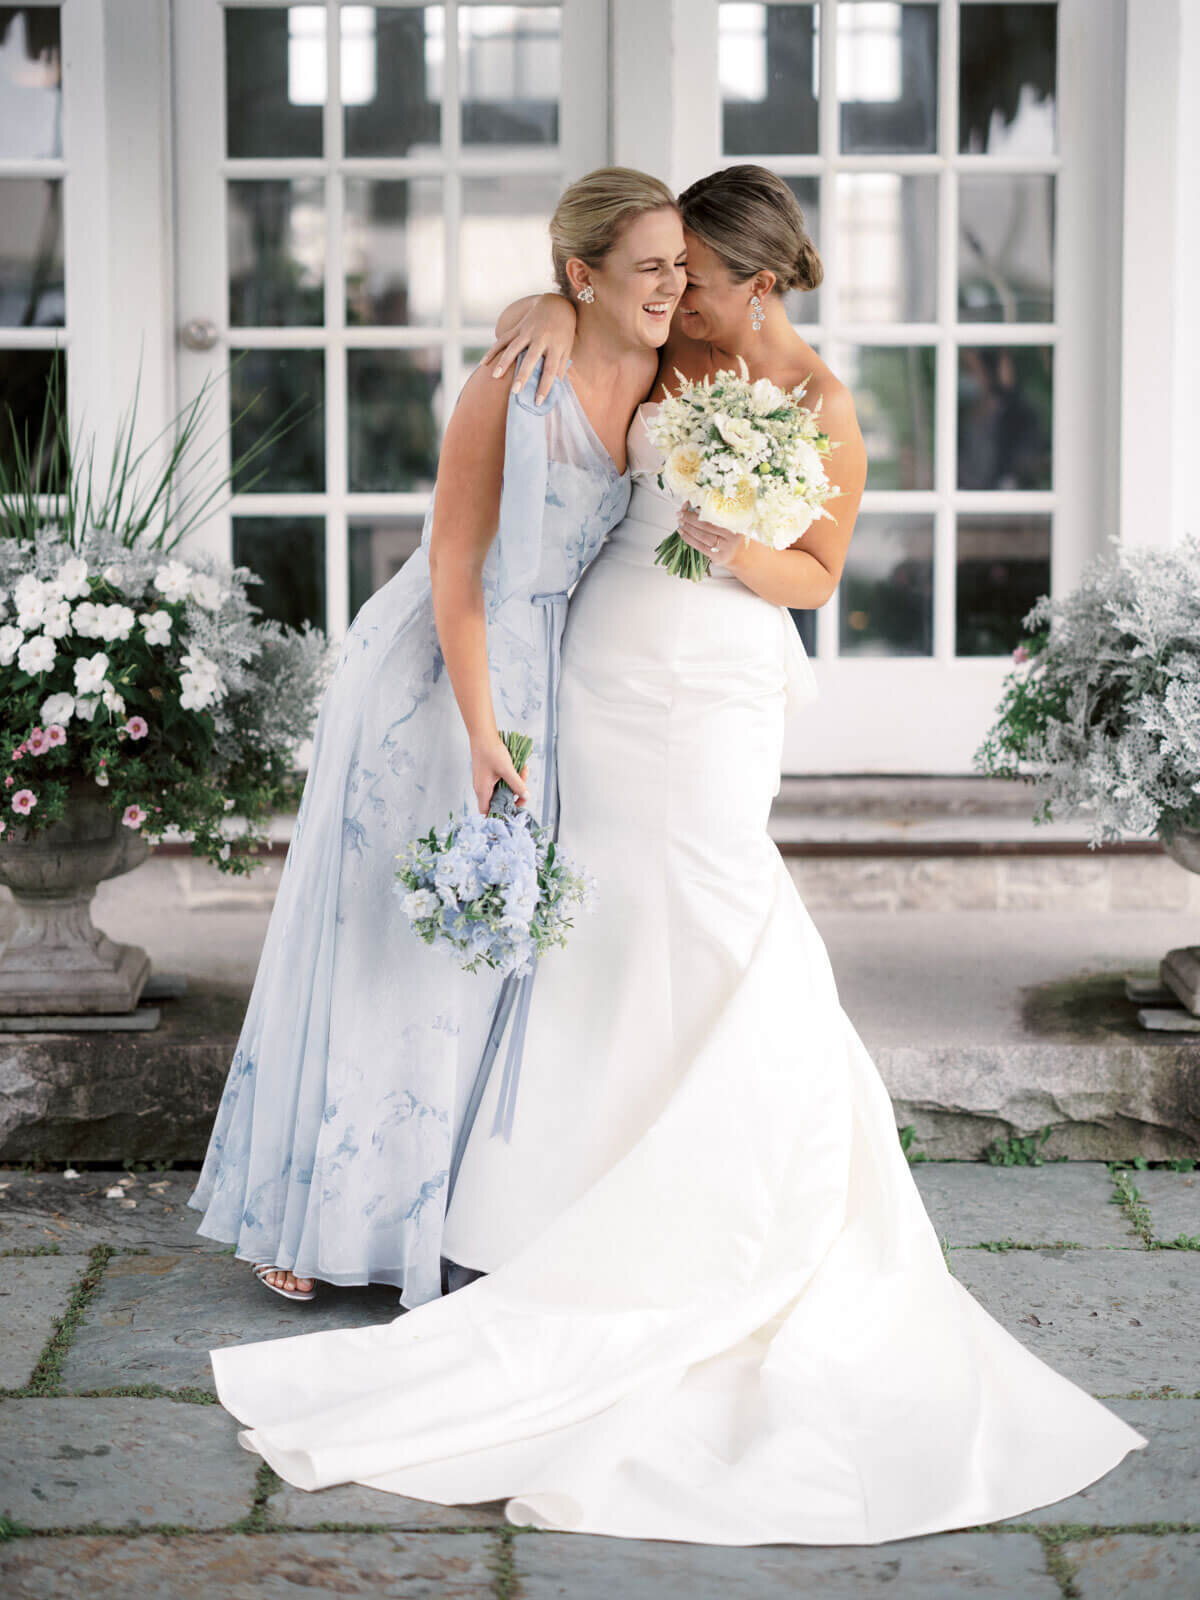 The bride and her maid of honor are happily hugging each other at The Lion Rock Farm, Sharon, CT. Image by Jenny Fu Studio